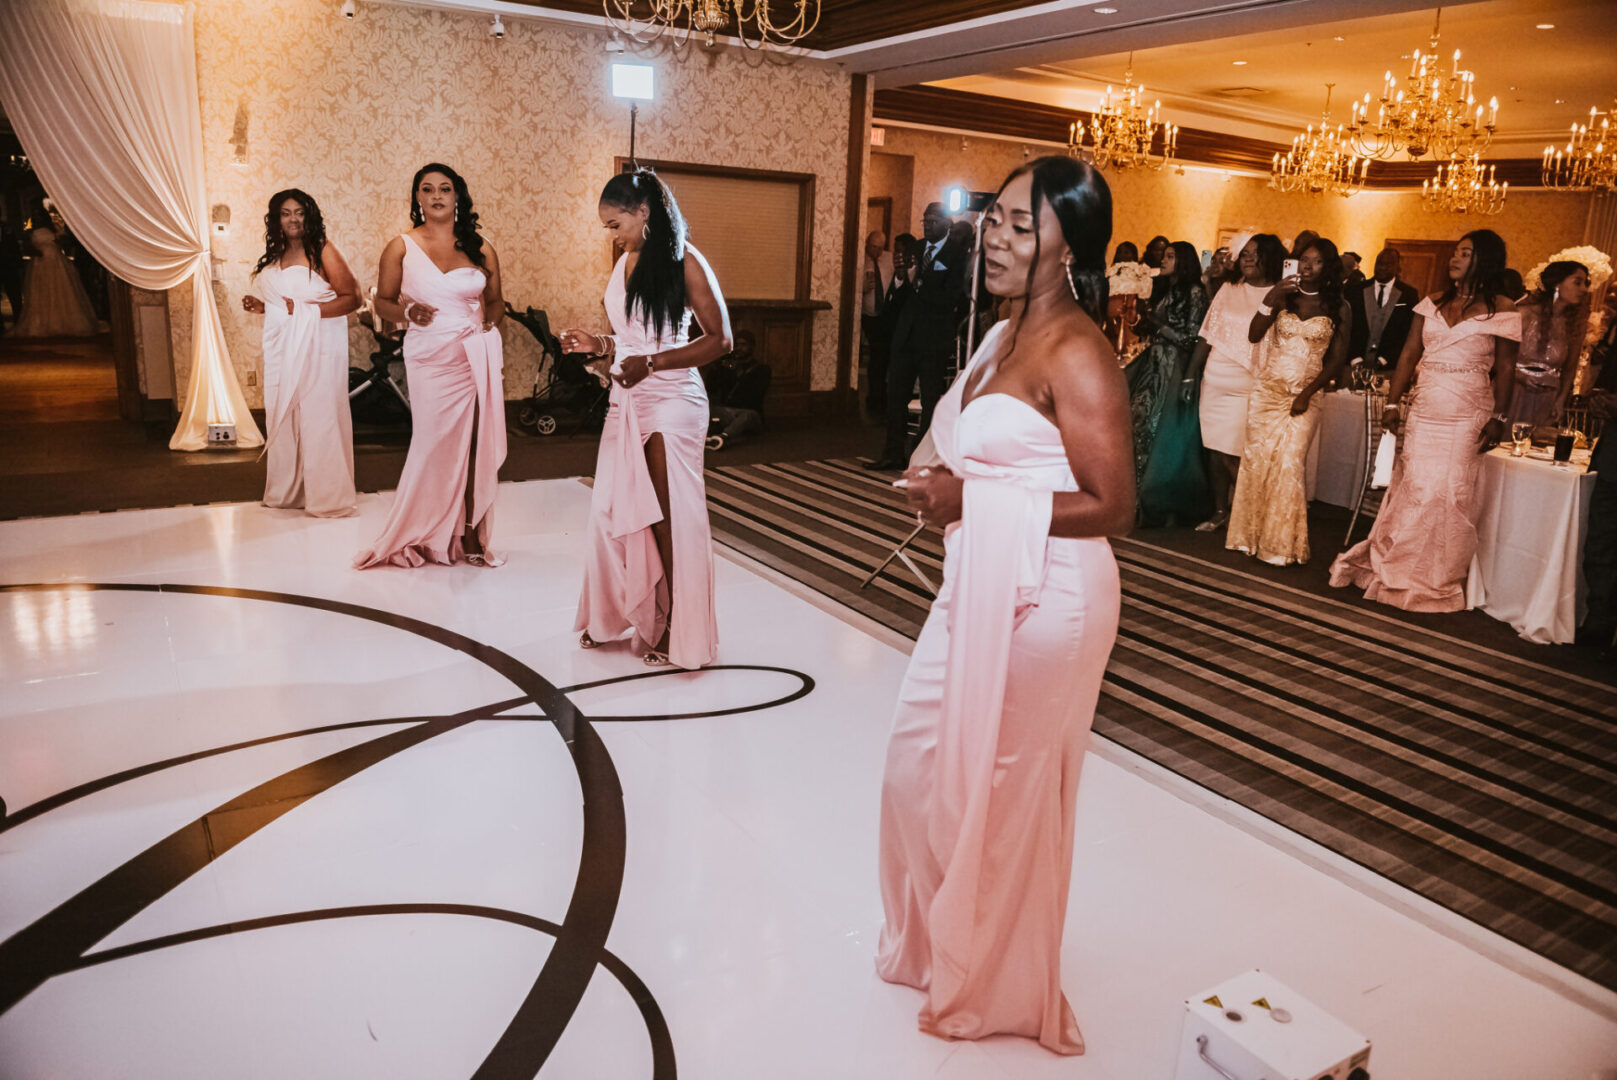 Bridal party introduction